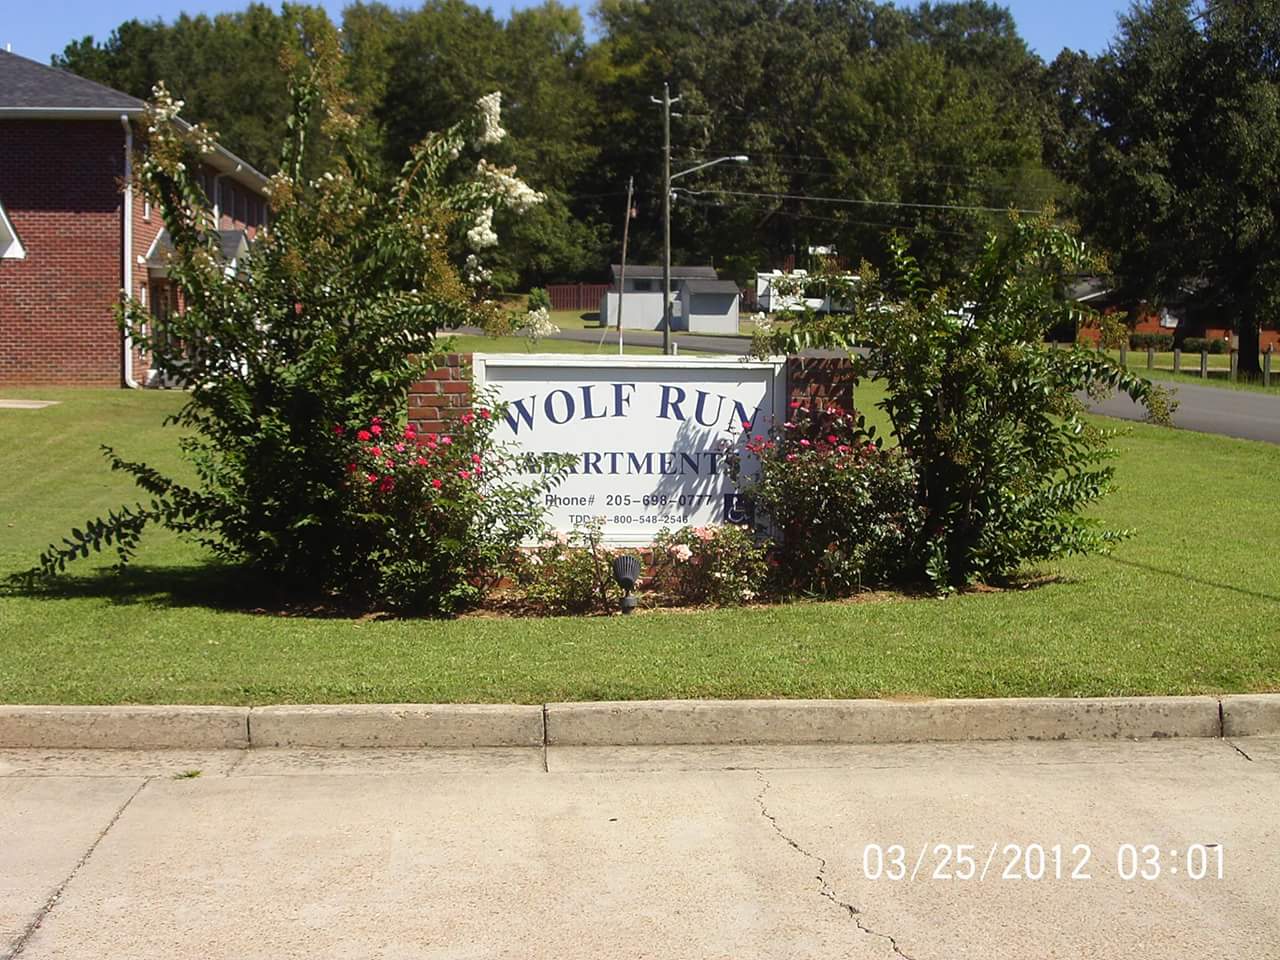 Photo of WOLF RUN APTS. Affordable housing located at 115 WOLF RUN SULLIGENT, AL 35586